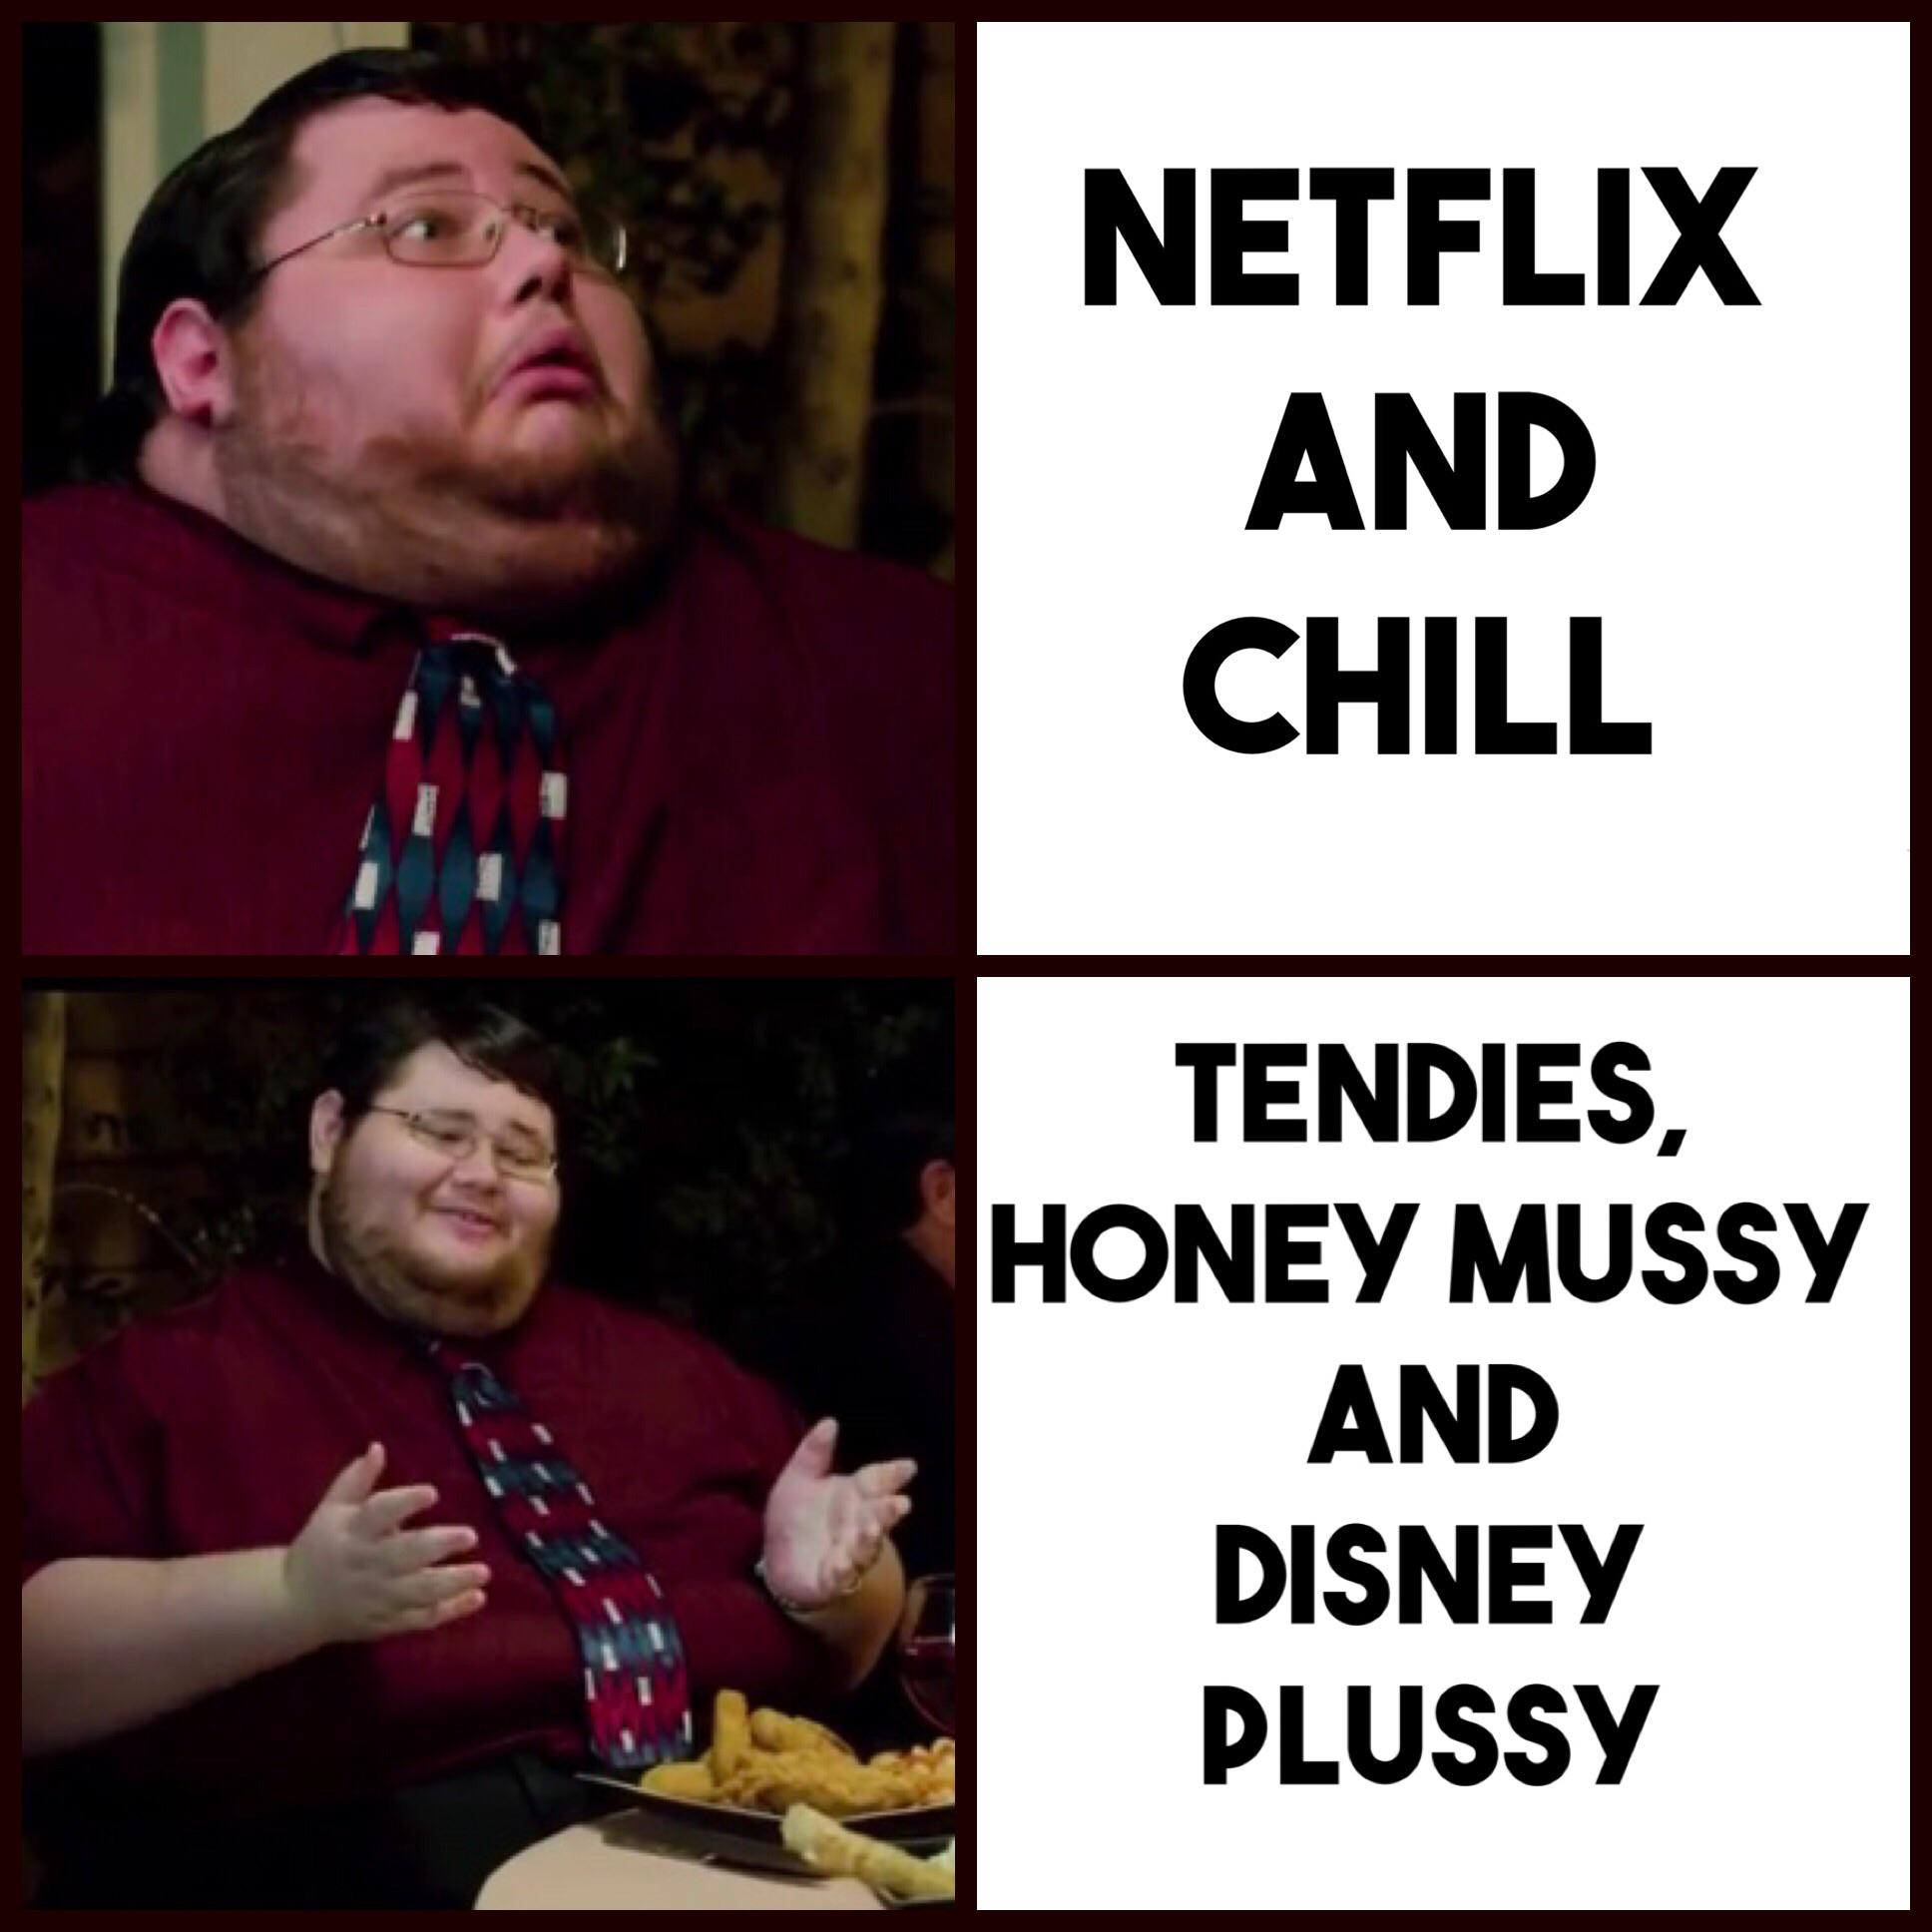 photo caption - Netflix And Chill Tendies, Honey Mussy And Disney Plussy